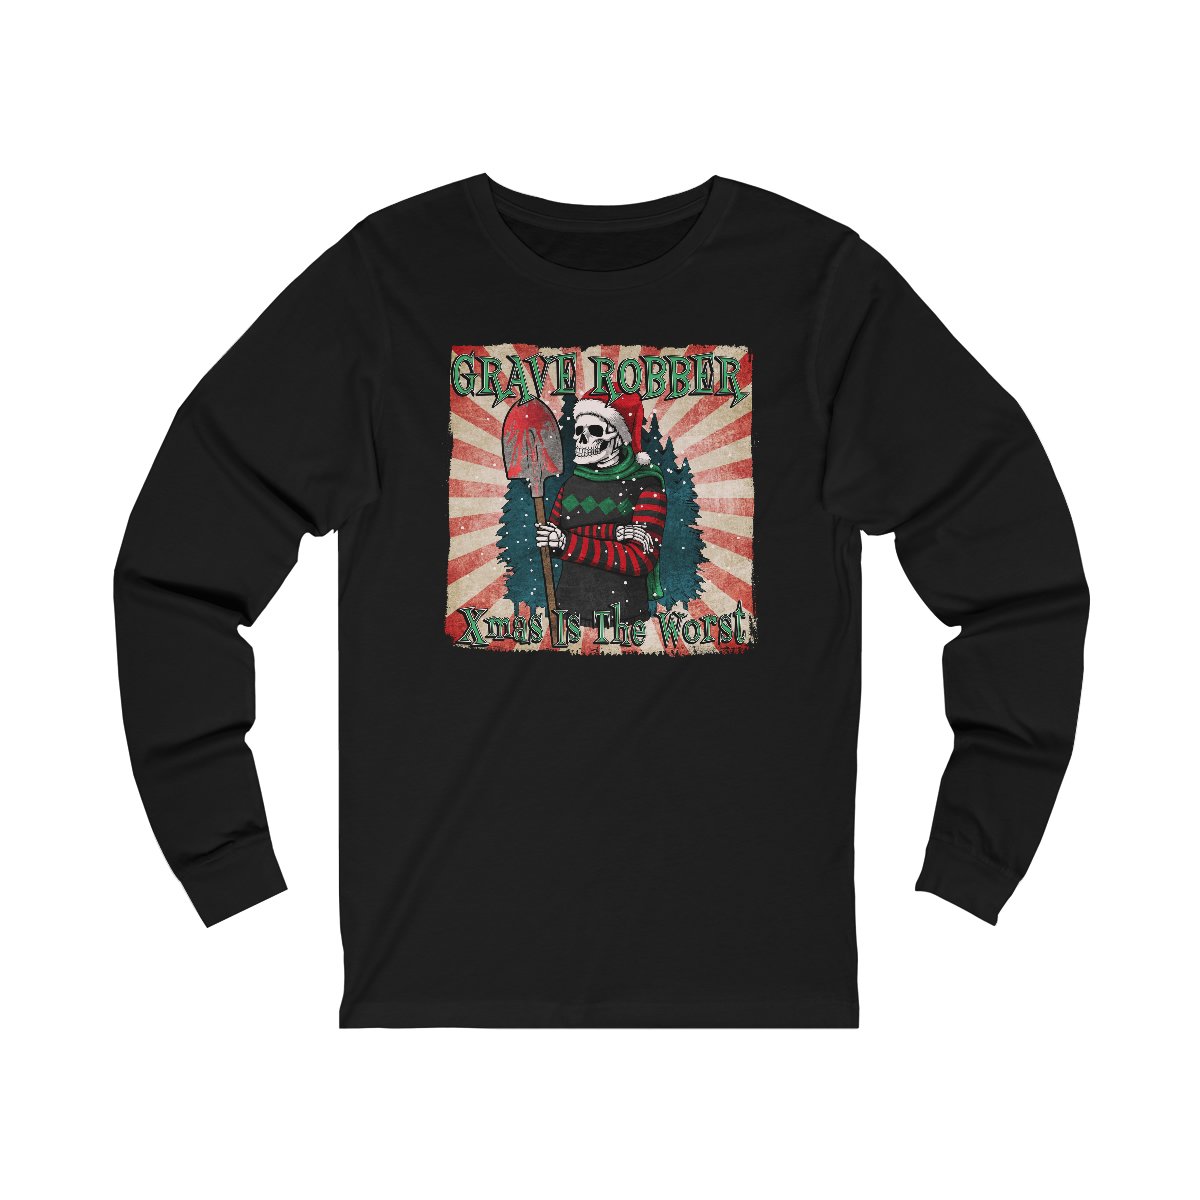 Grave Robber – Xmas Is The Worst Long Sleeve Tshirt